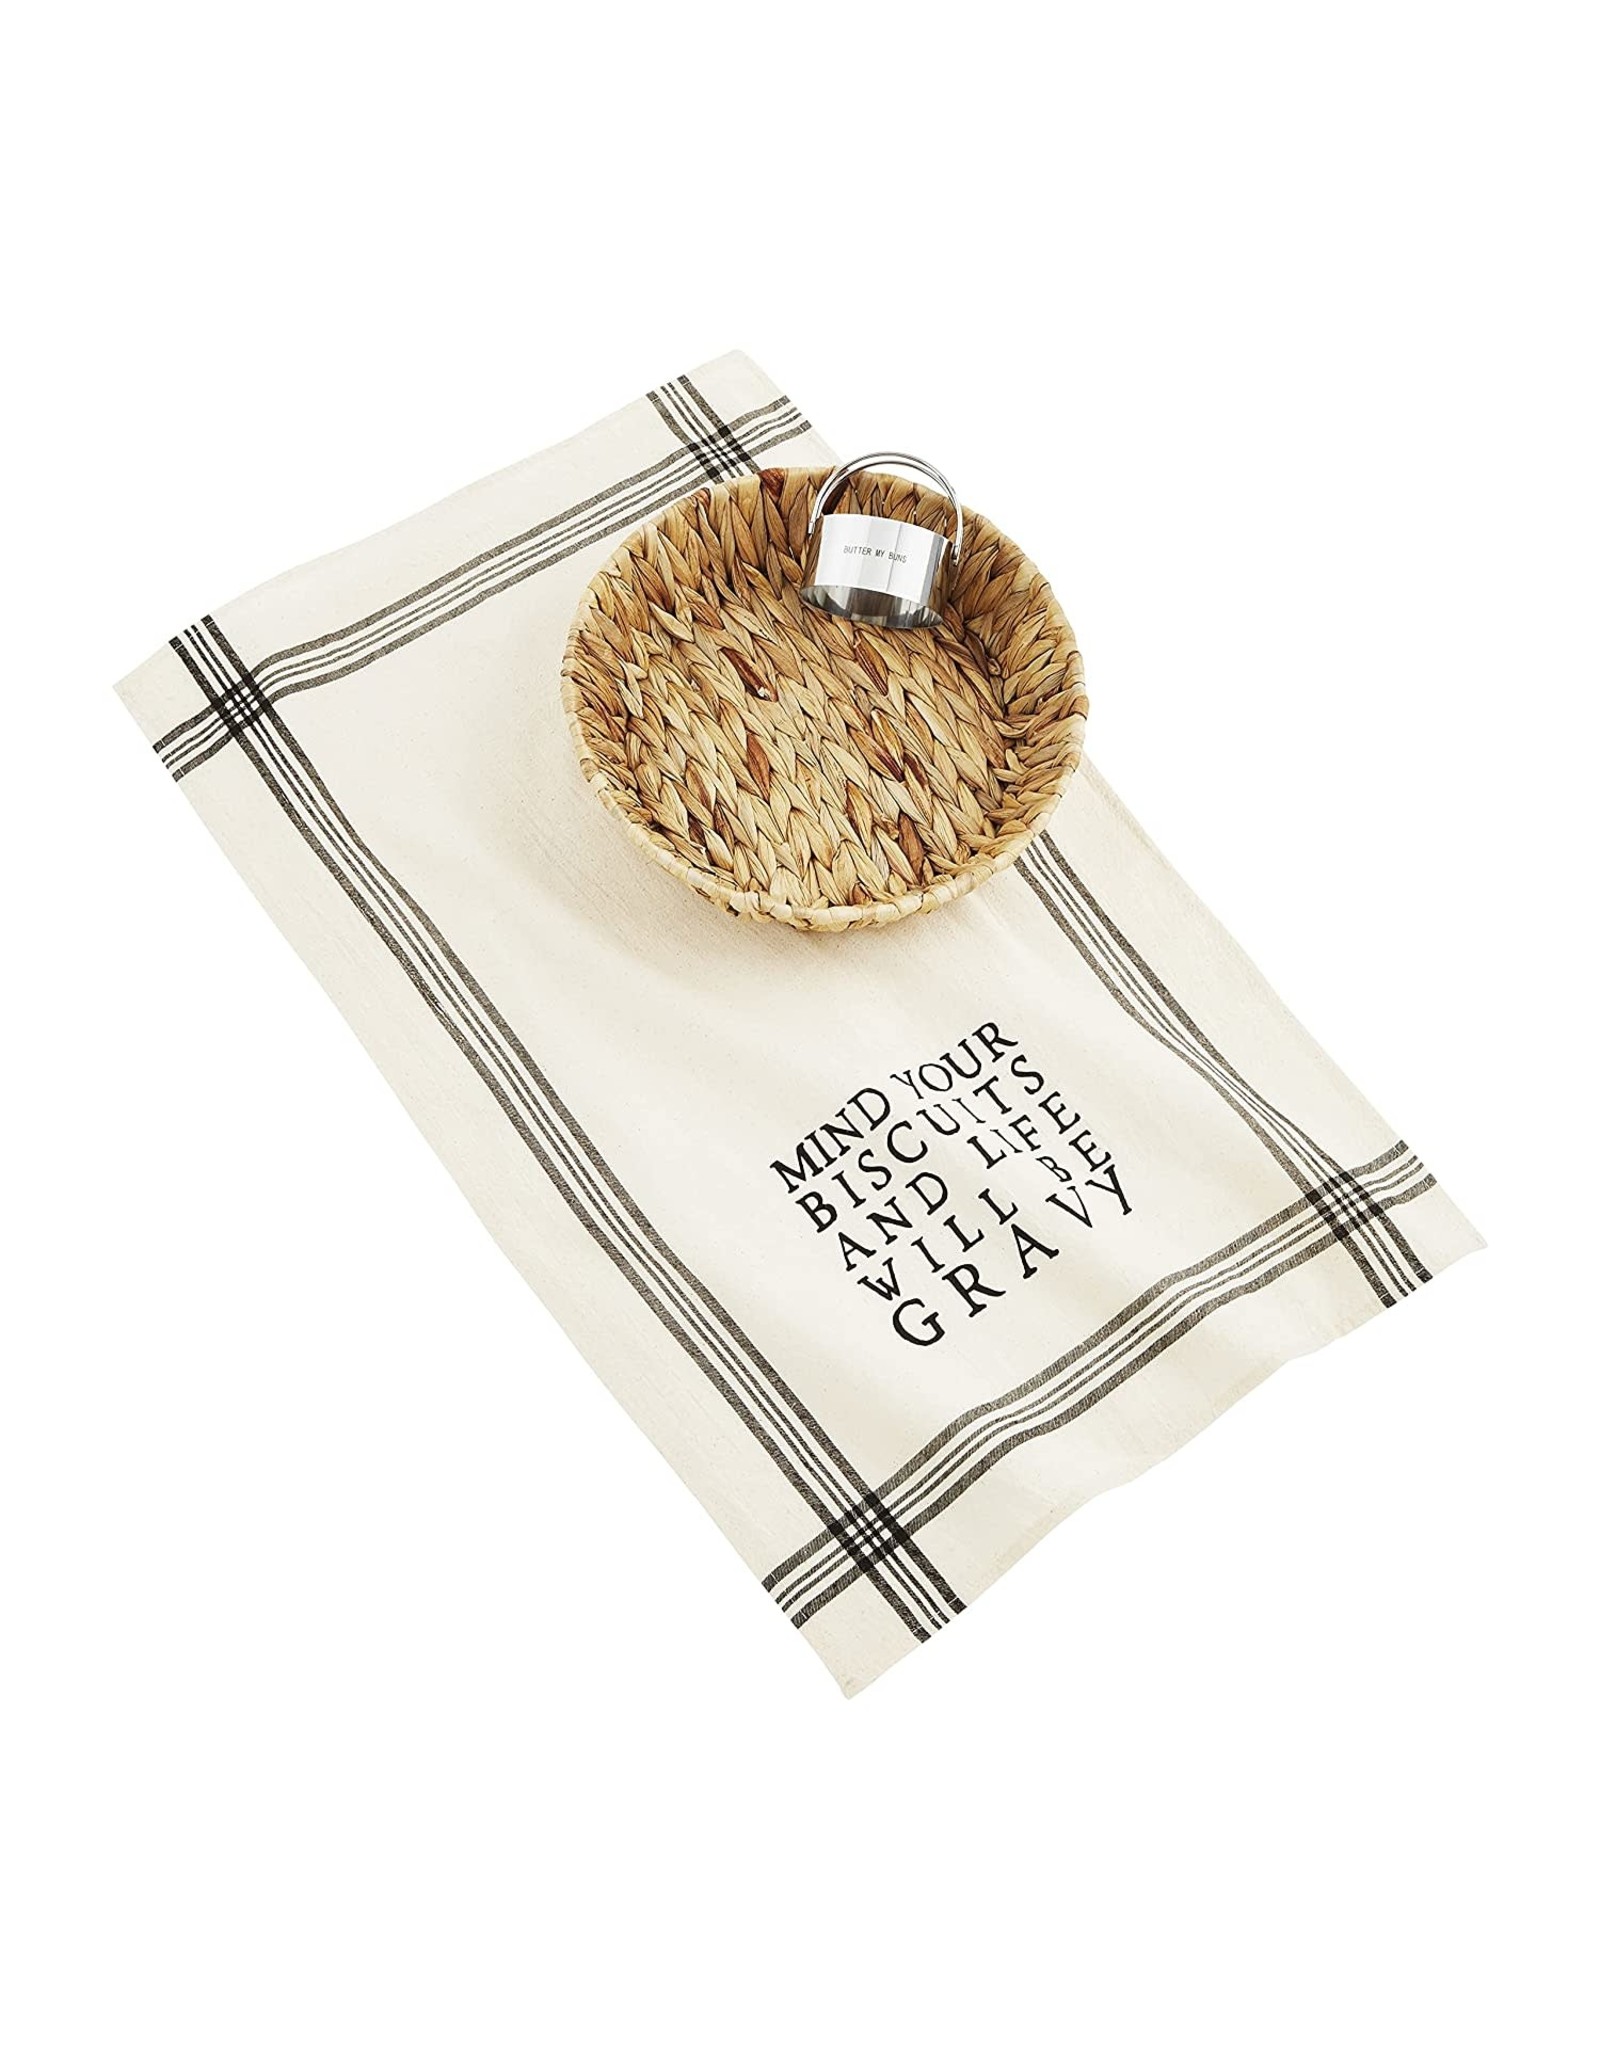 Mud Pie Biscuit Basket Towel and Cutter Set W Mind Your Biscuits